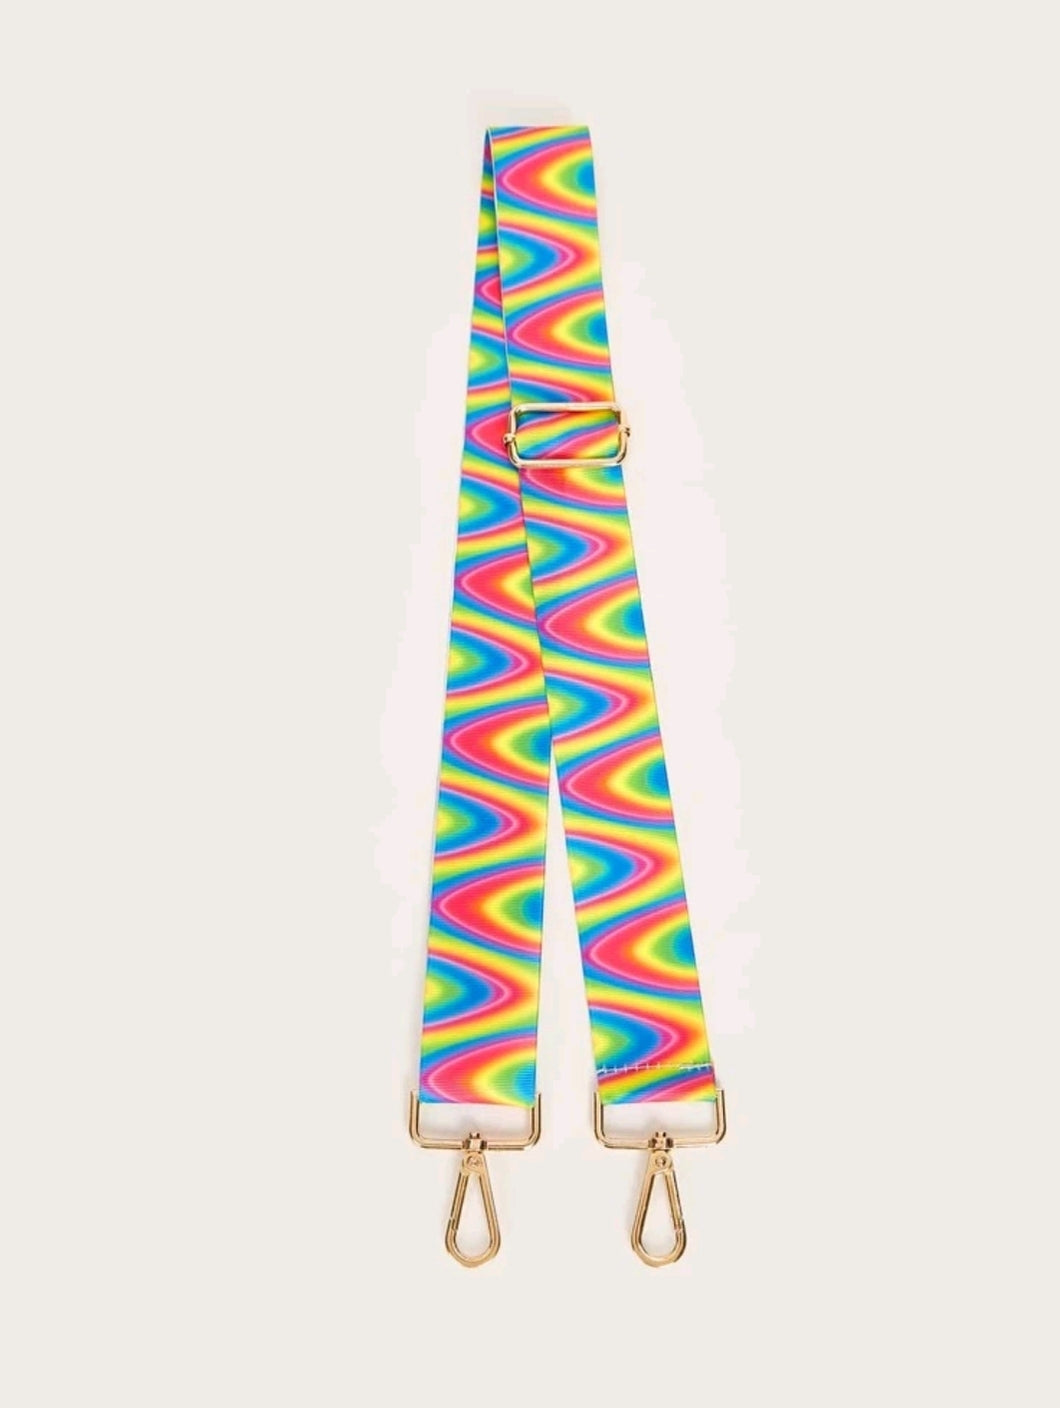 Lovely colourful soft comfy rainbow old fancy gay carnival style block bag strap